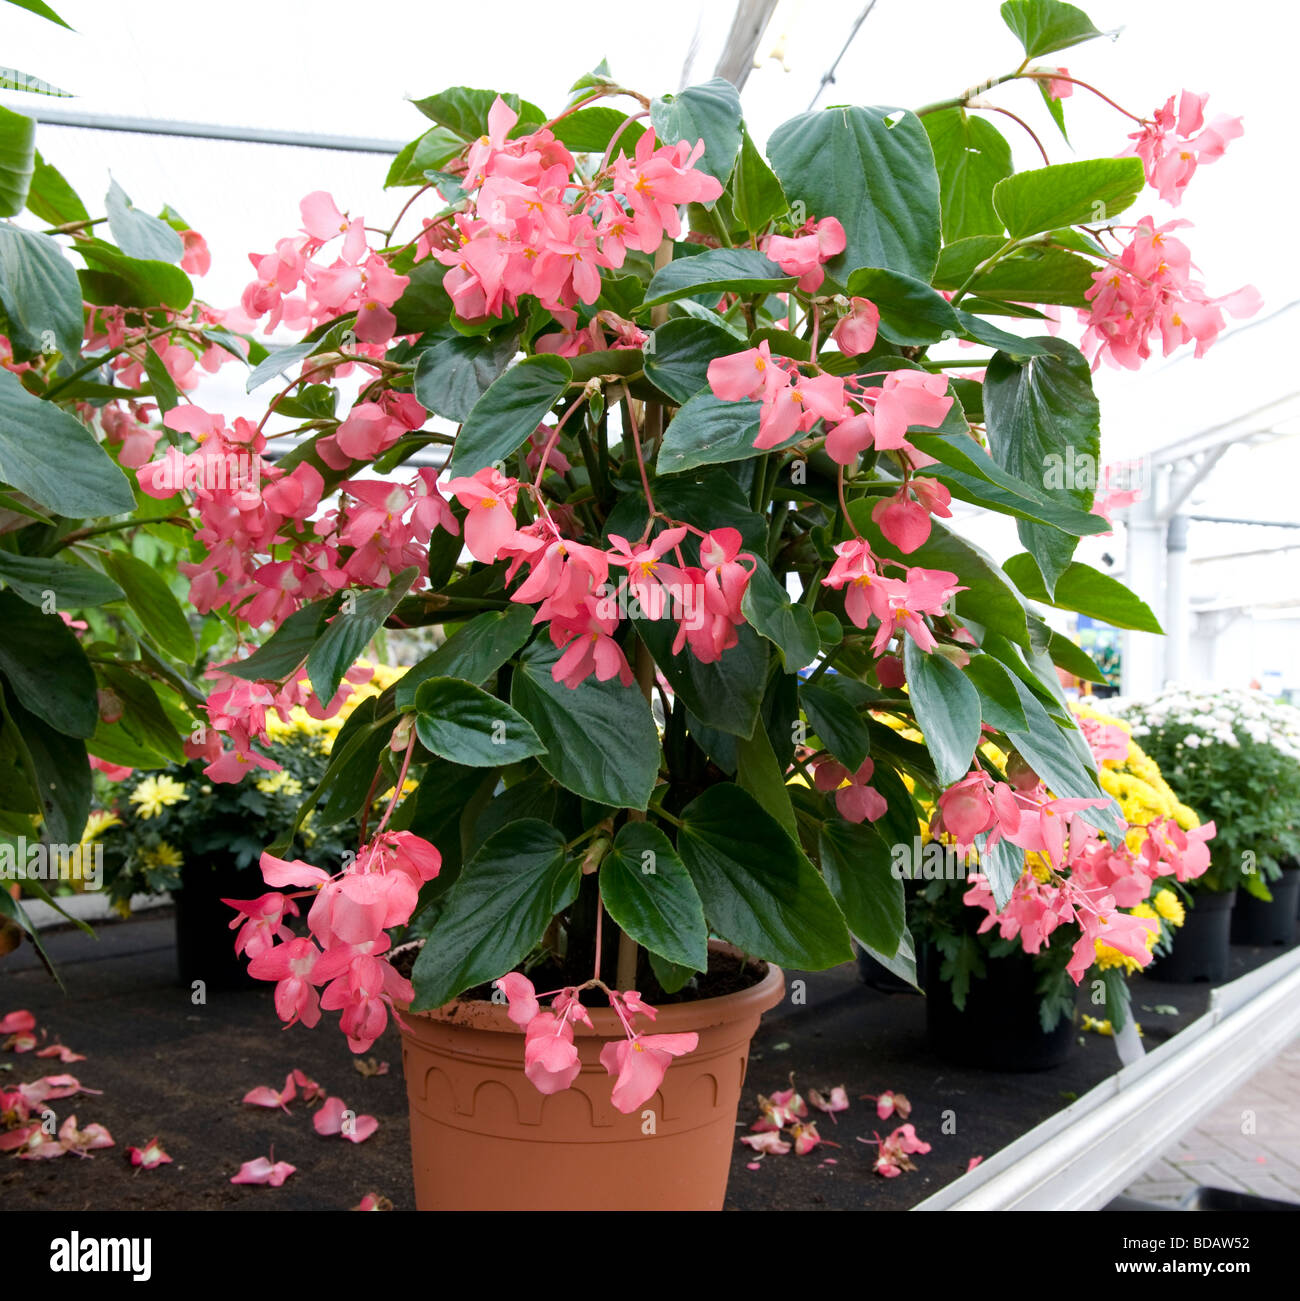 Begonia `Dragon Wing`. Pot grown plant with small pink flowers in abundance  Stock Photo - Alamy